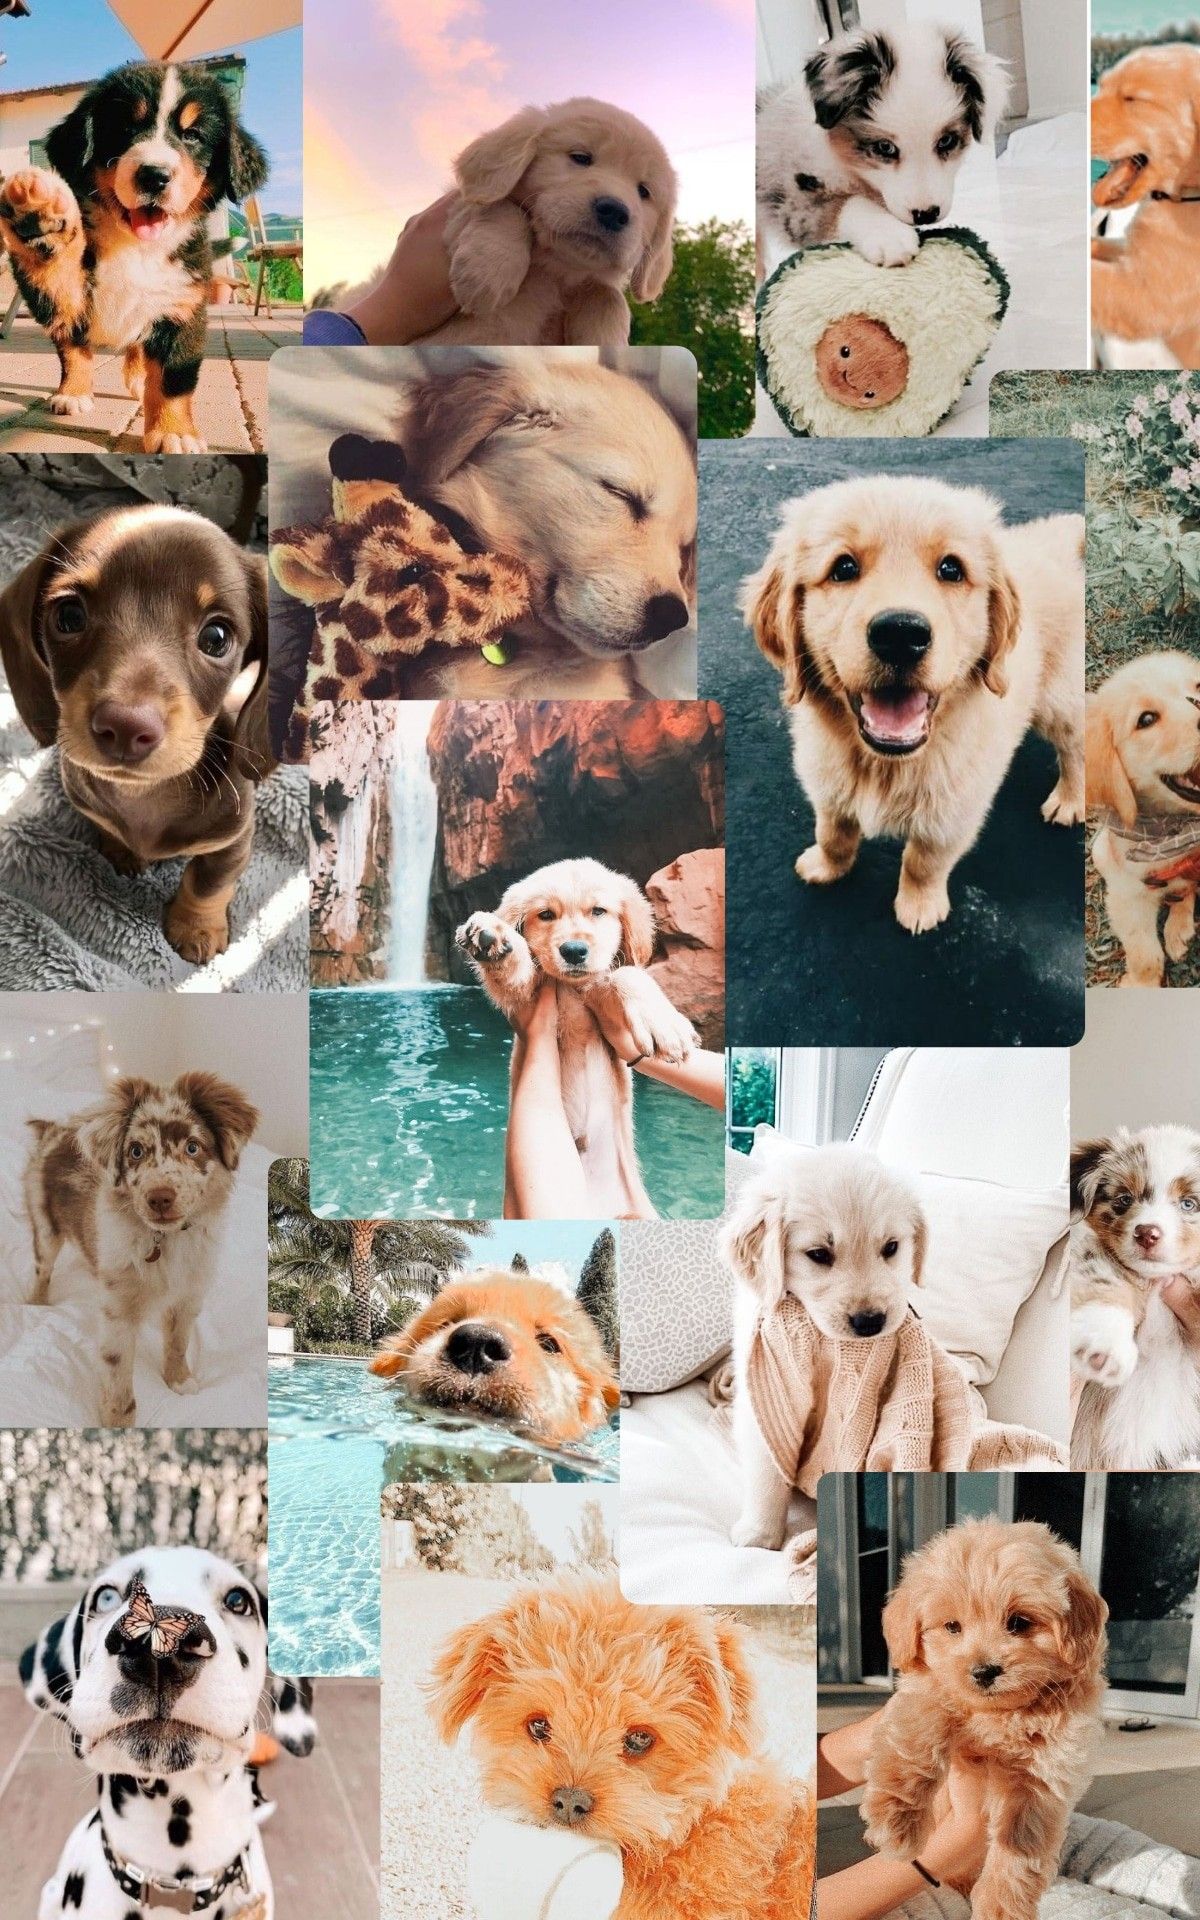 Aesthetic Dog Wallpapers